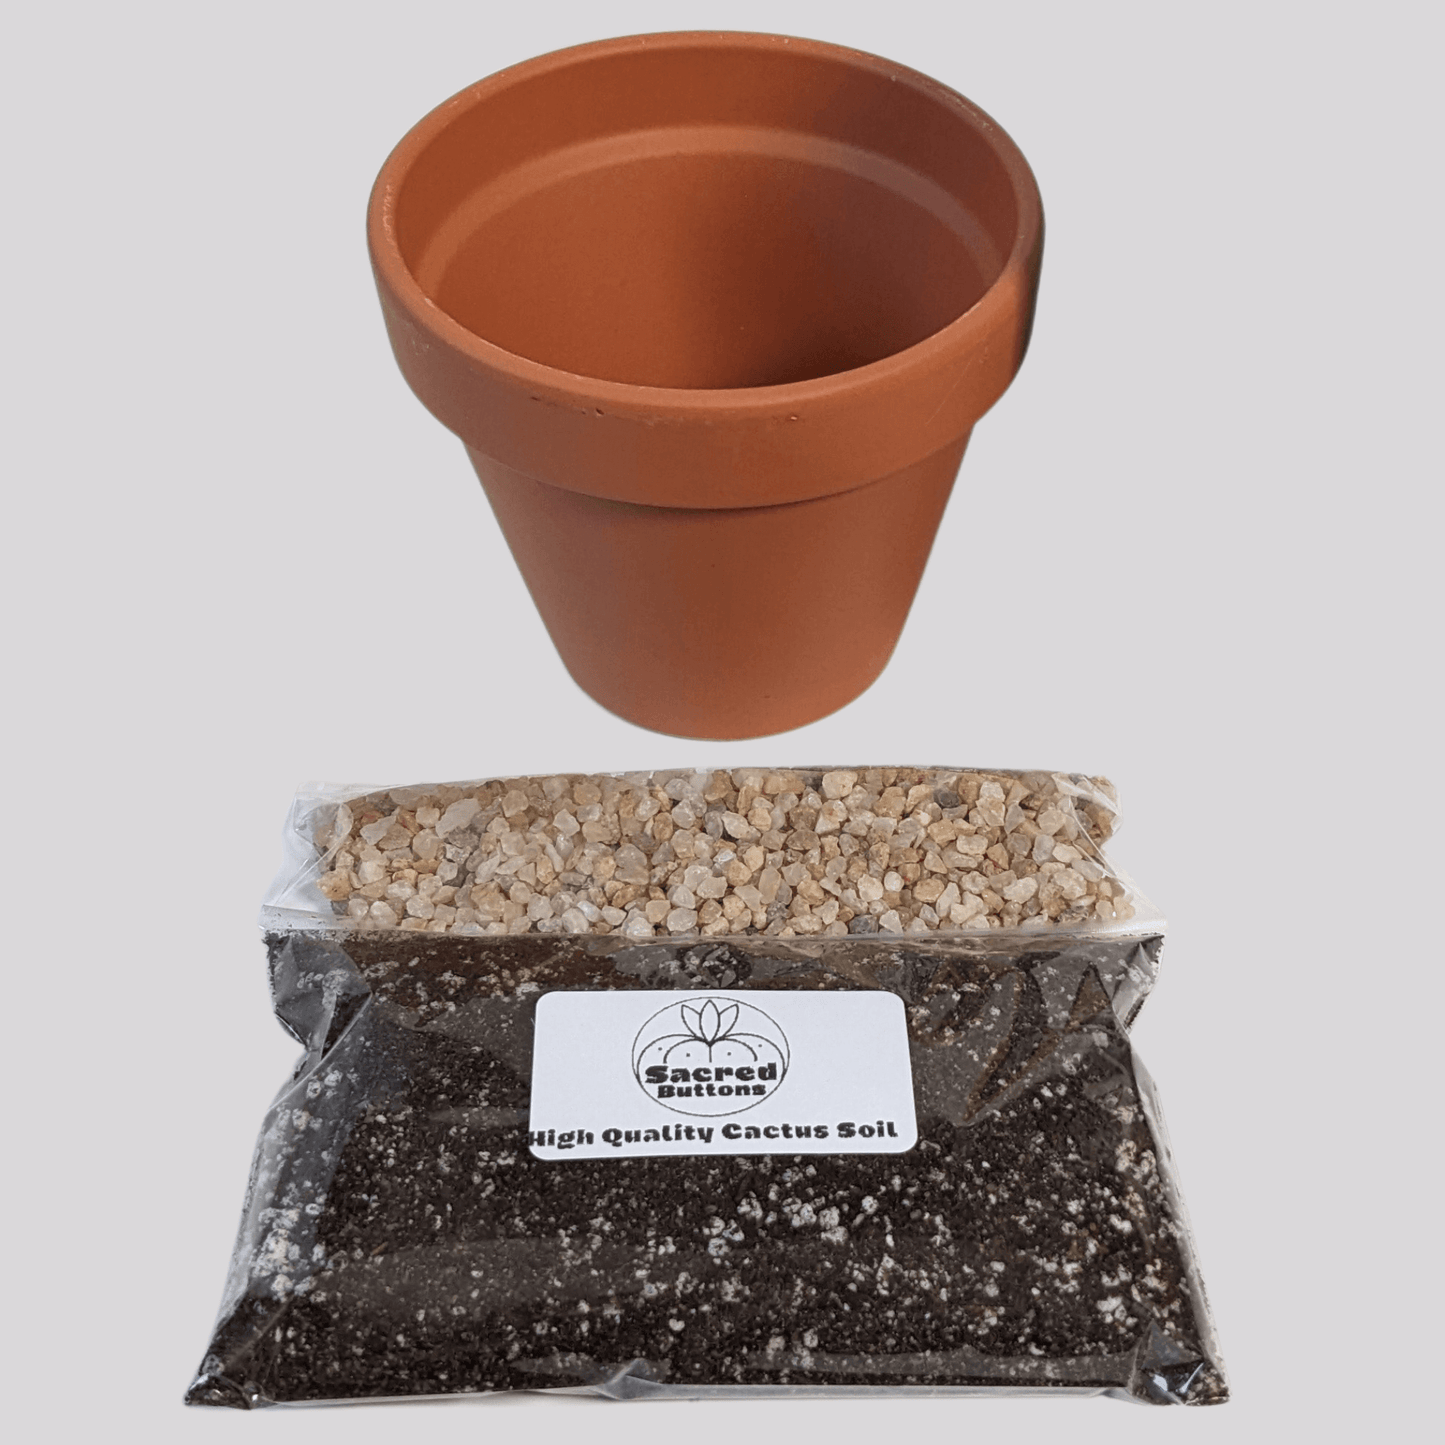 A cactus potting kit that includes a clay pot, a bag of soil, and soil topping stones.